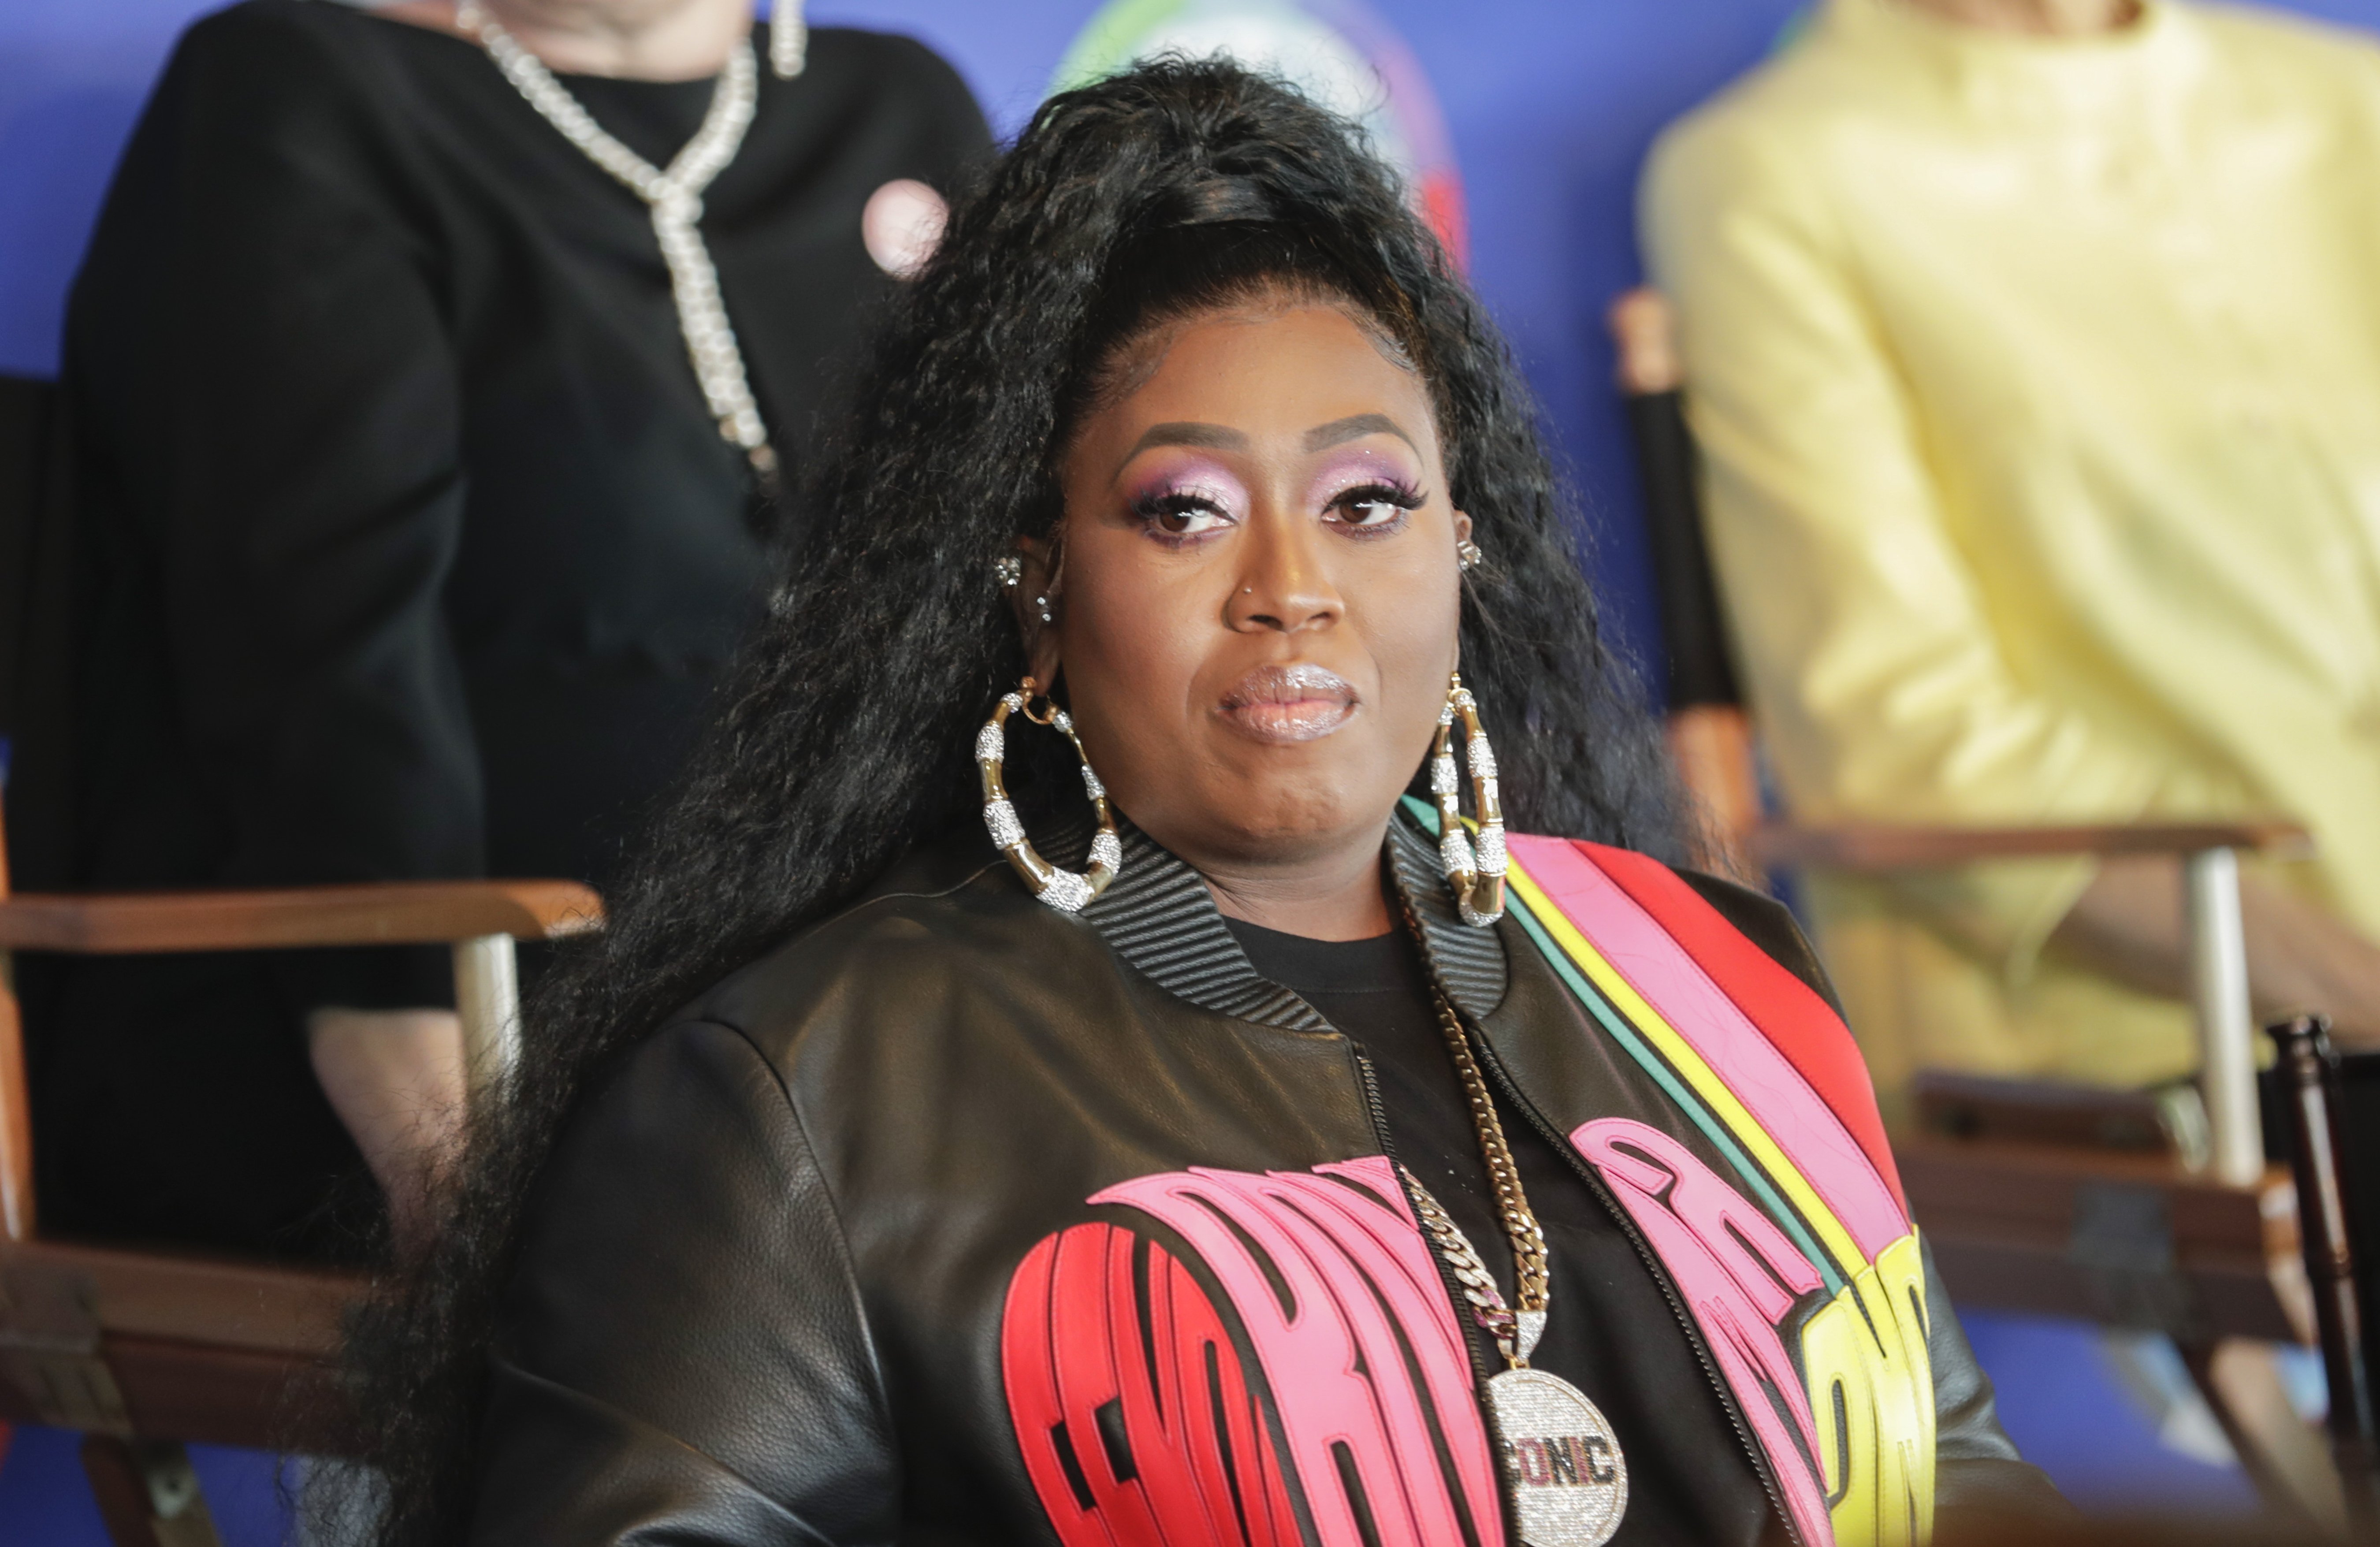 Missy Elliott at the Women's Entrepreneurship Day (WED) at the UN Headquarters in New York City, November 15, 2019.| Source: Getty Images